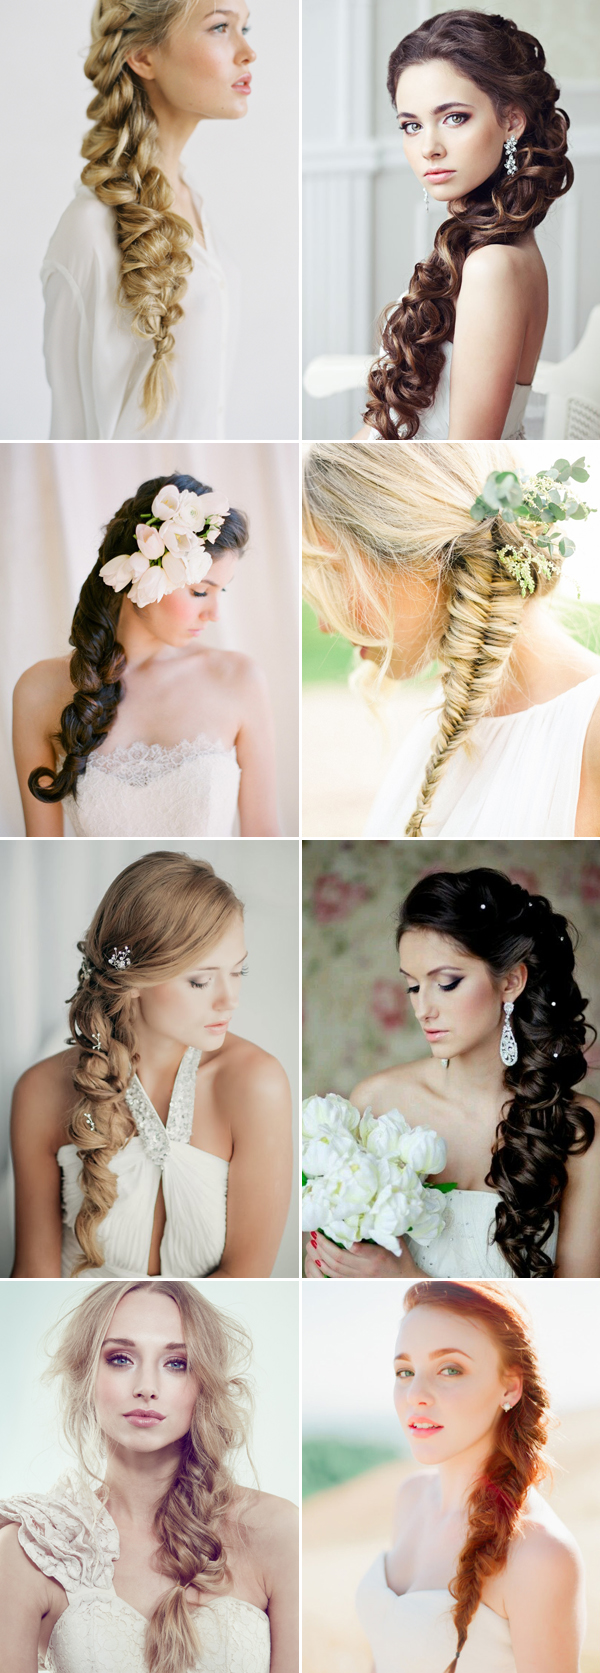 42 Steal-Worthy Wedding Hairstyles for Long Hair | DPF